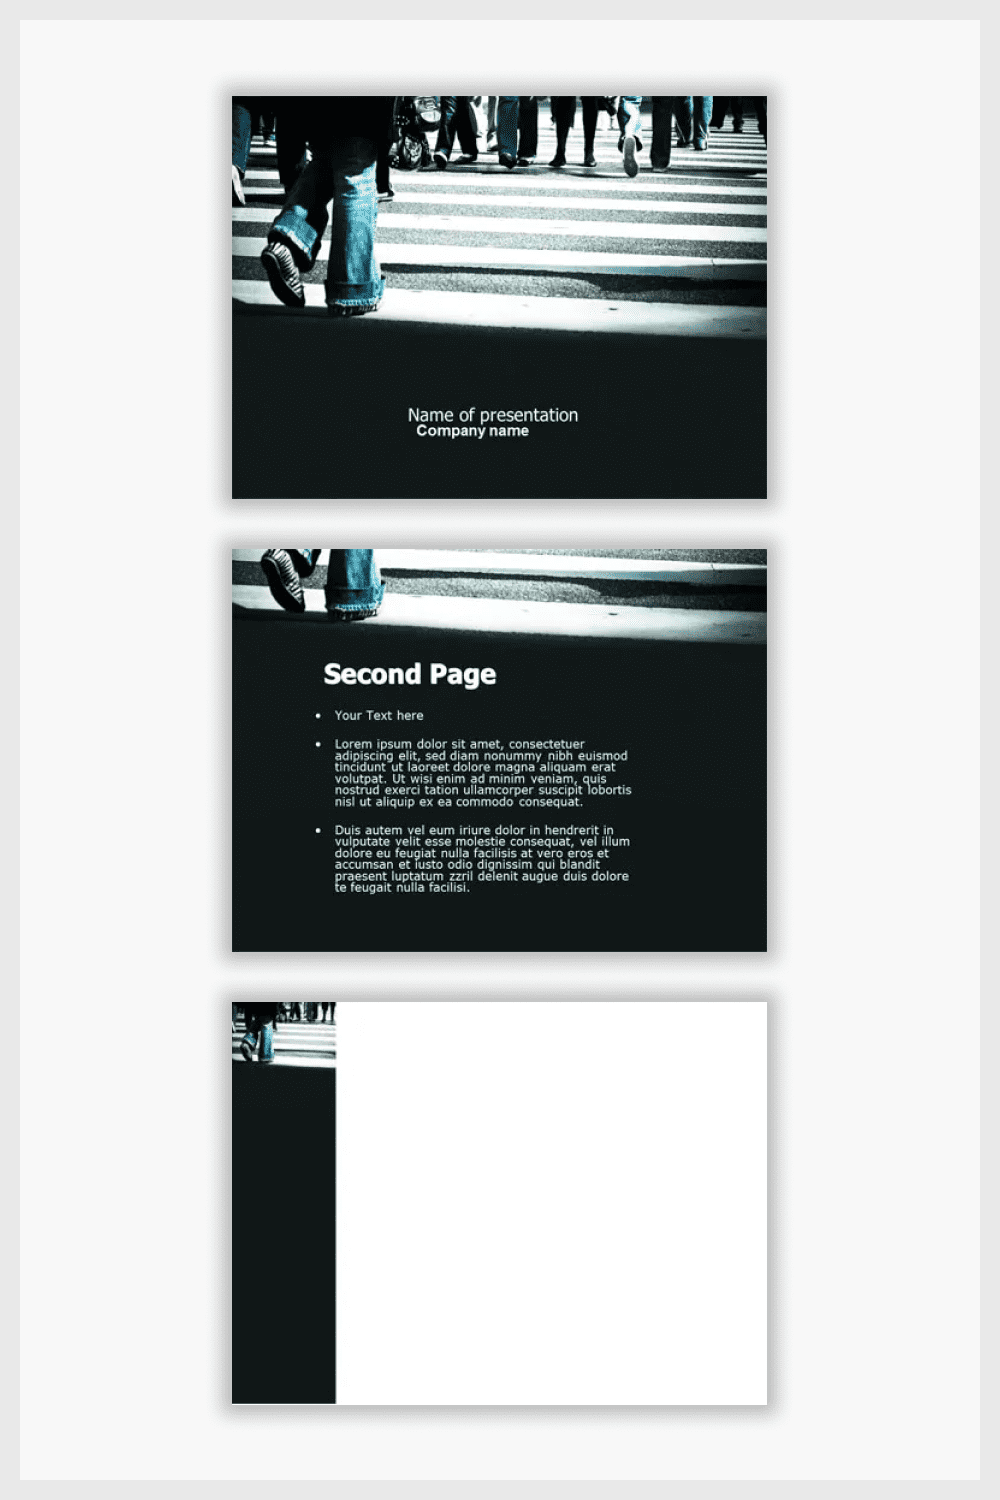 Collage of presentation pages with black background and white text.